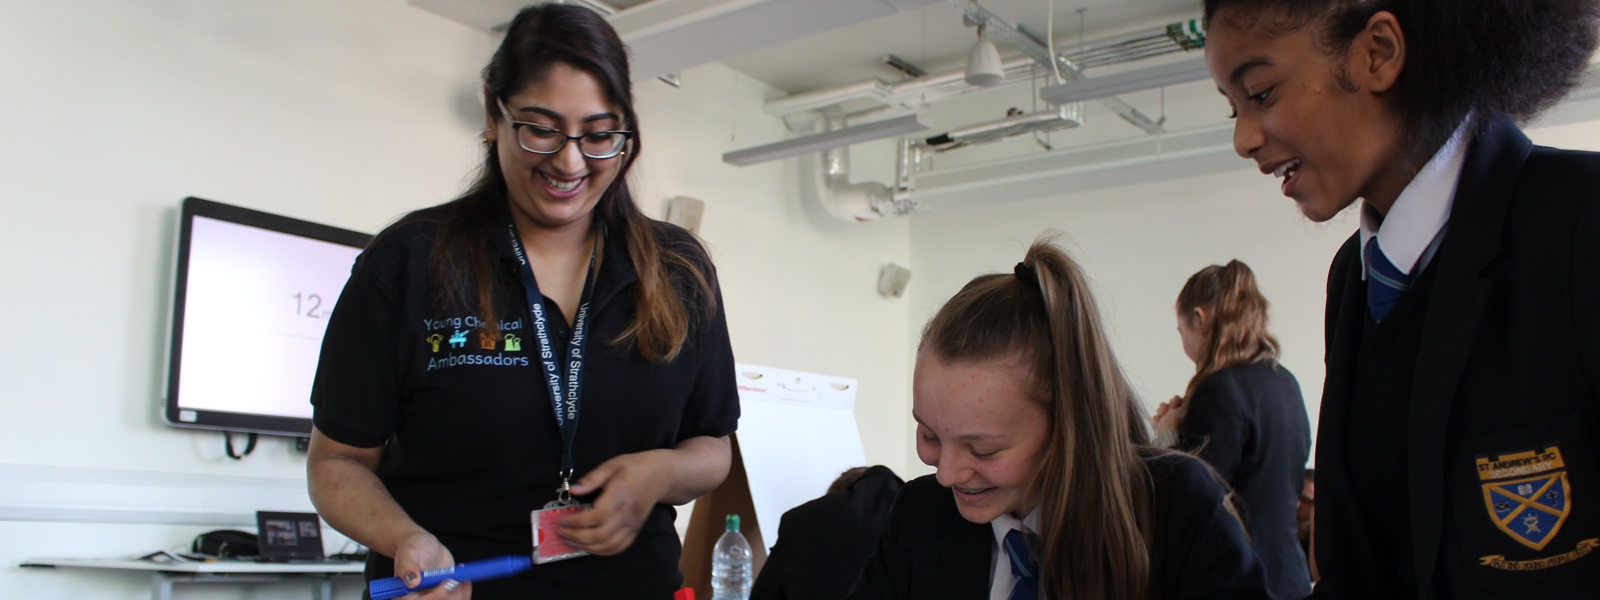 female pupils taking part in outreach event